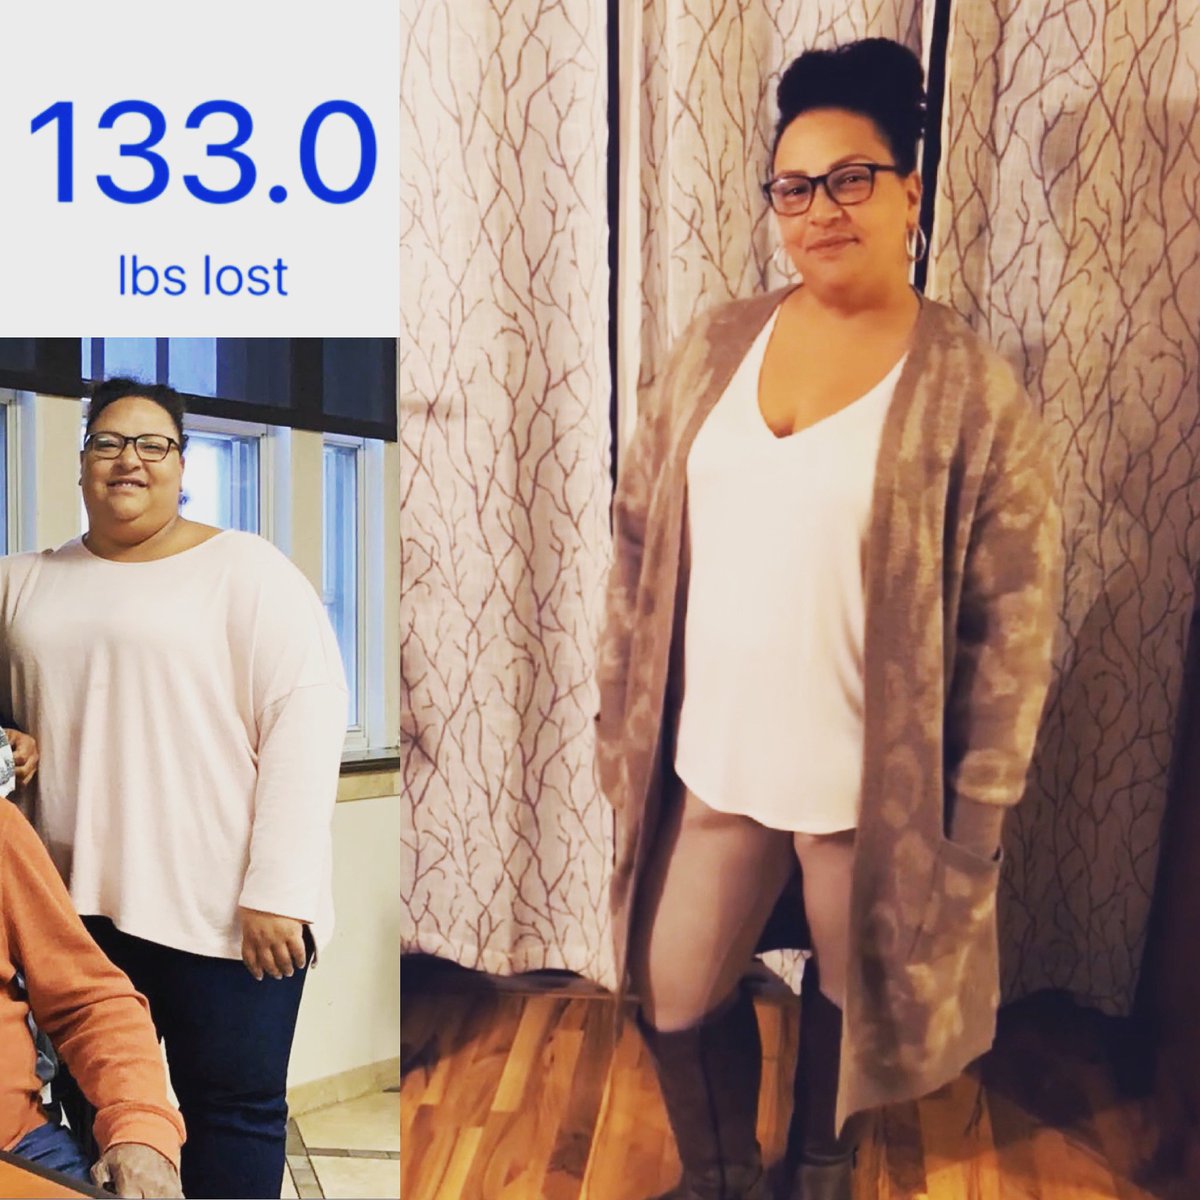 I thought on this #transformationtuesday I would take a moment to introduce myself.
I had #VSG on 05/14/22. I follow my plan and receive daily #encouragement, #strength, and #support from my #Barifamily. I’m on a #mission to support others on this #bariatricjourney